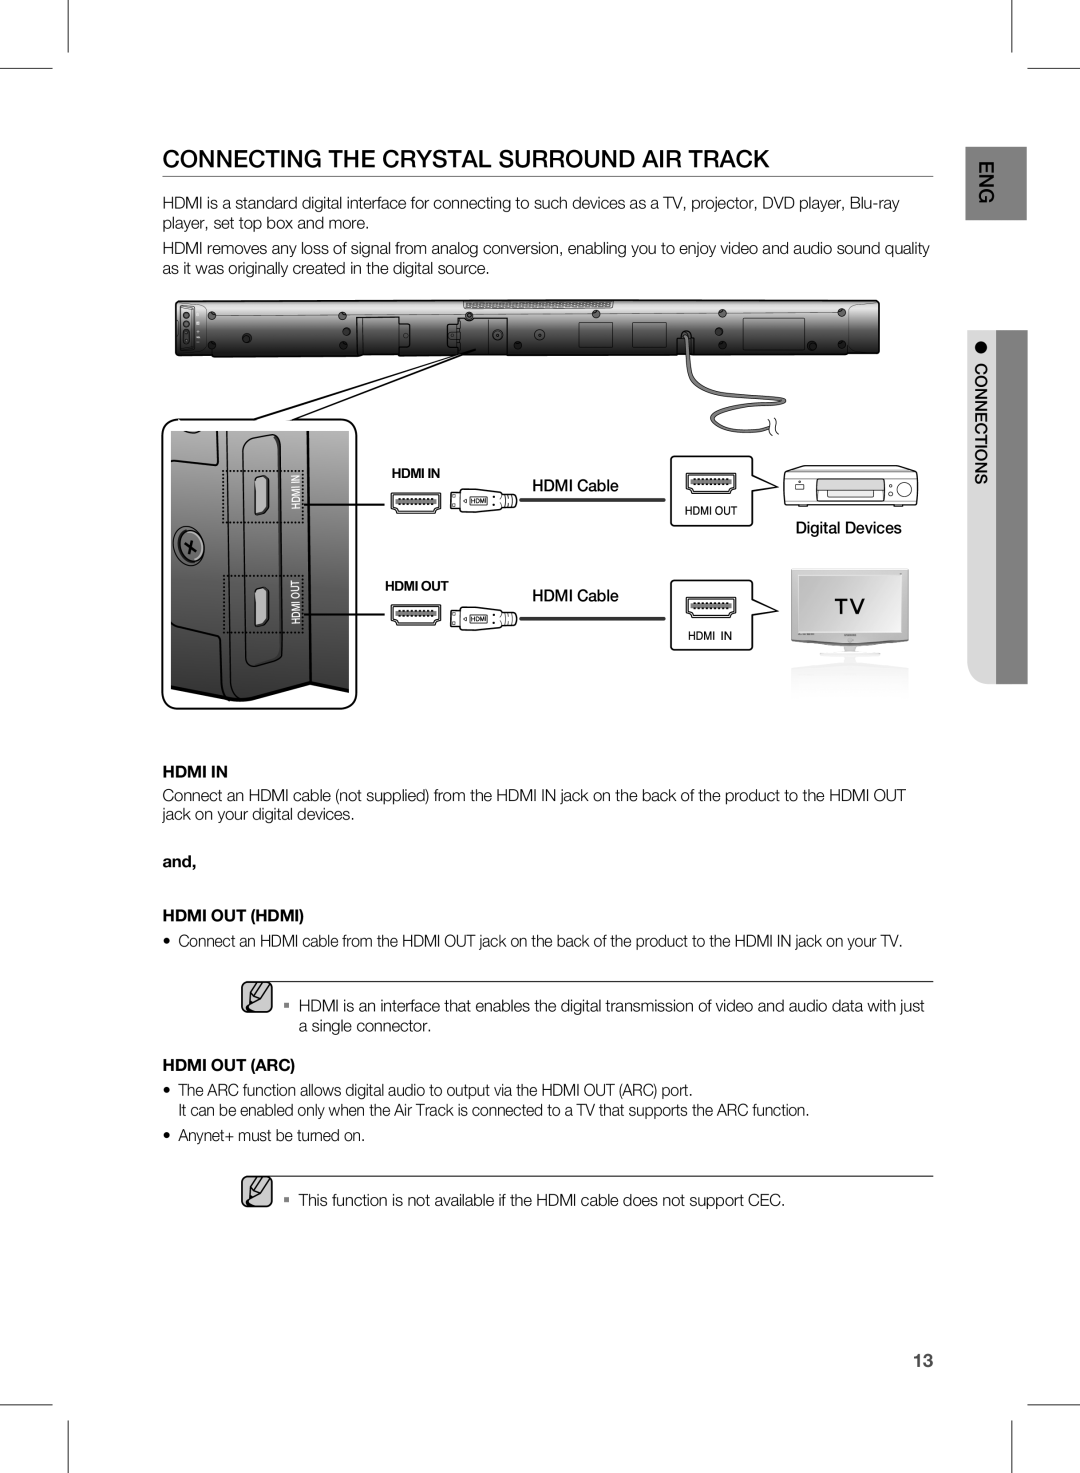 Samsung HW-E450 user manual cOnnecting tHe crystaL sUrrOUnD air tracK, HDMi cable, HDMI In, and HDMI OUt HDMI, HDMI OUt ARC 